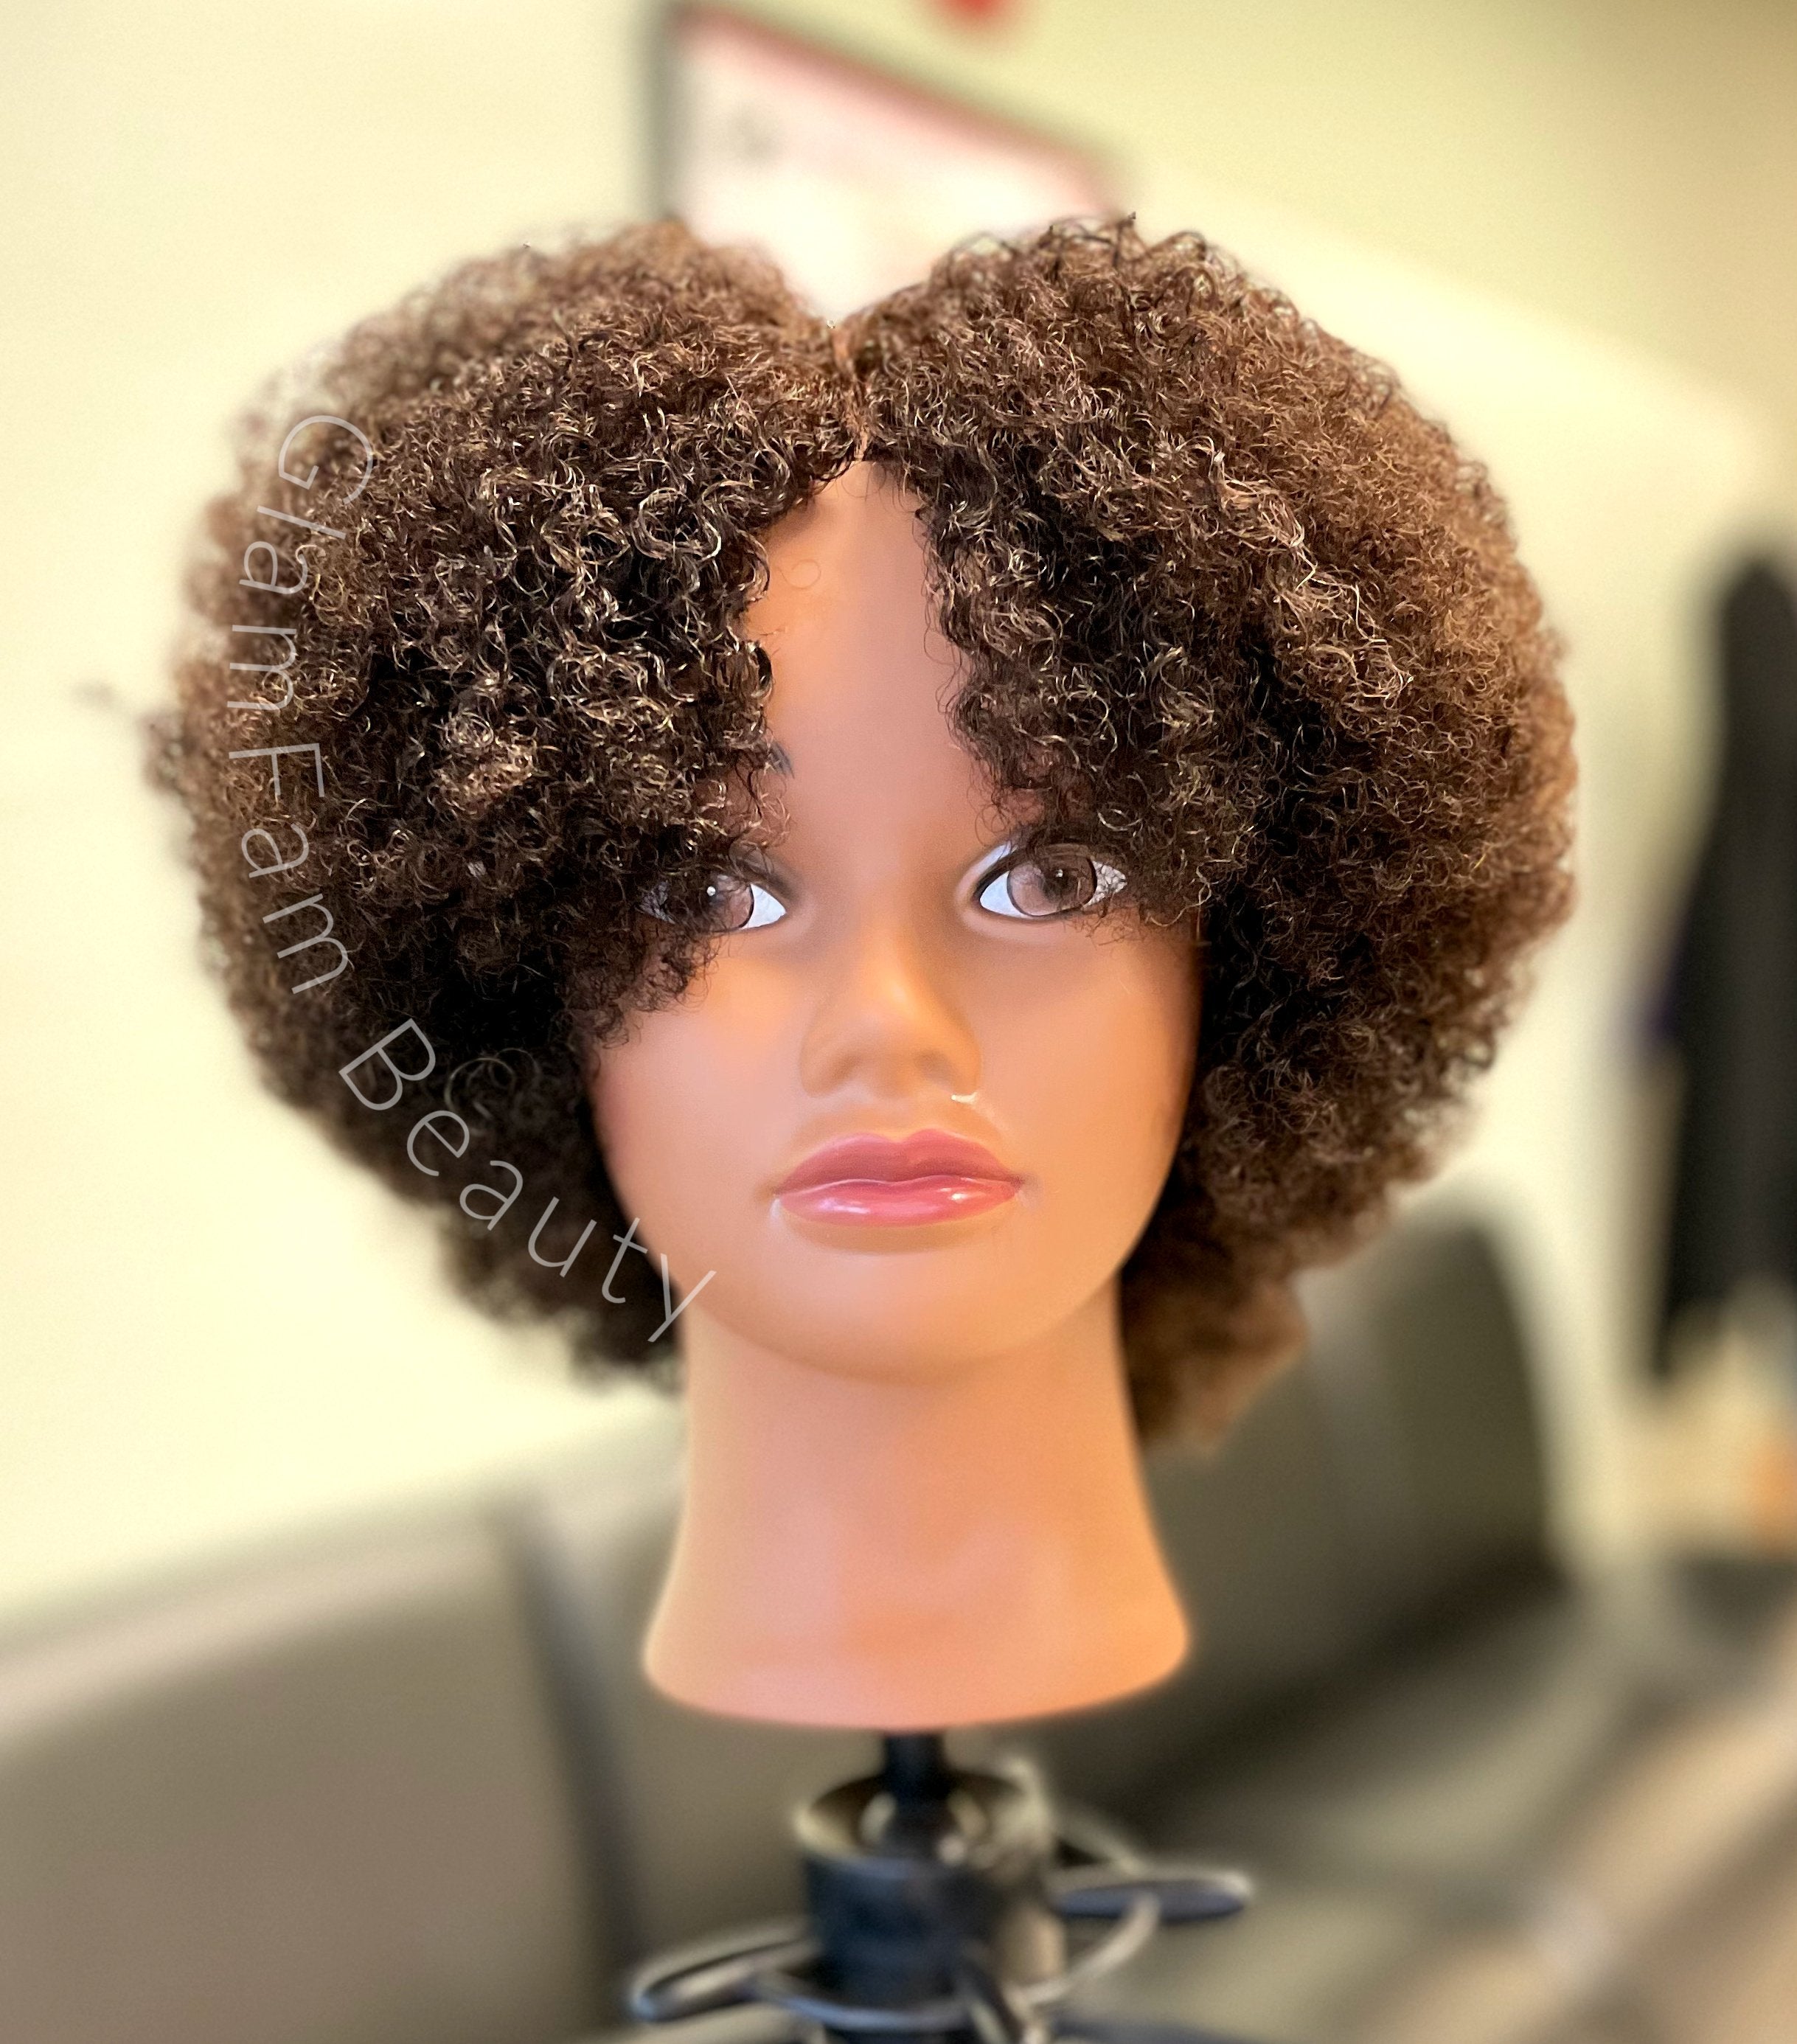 New Bald Afro Mannequin Head Without Hair For Making Wigs Hair Styling  Cosmetology Manikin Head African Training Dolls Head